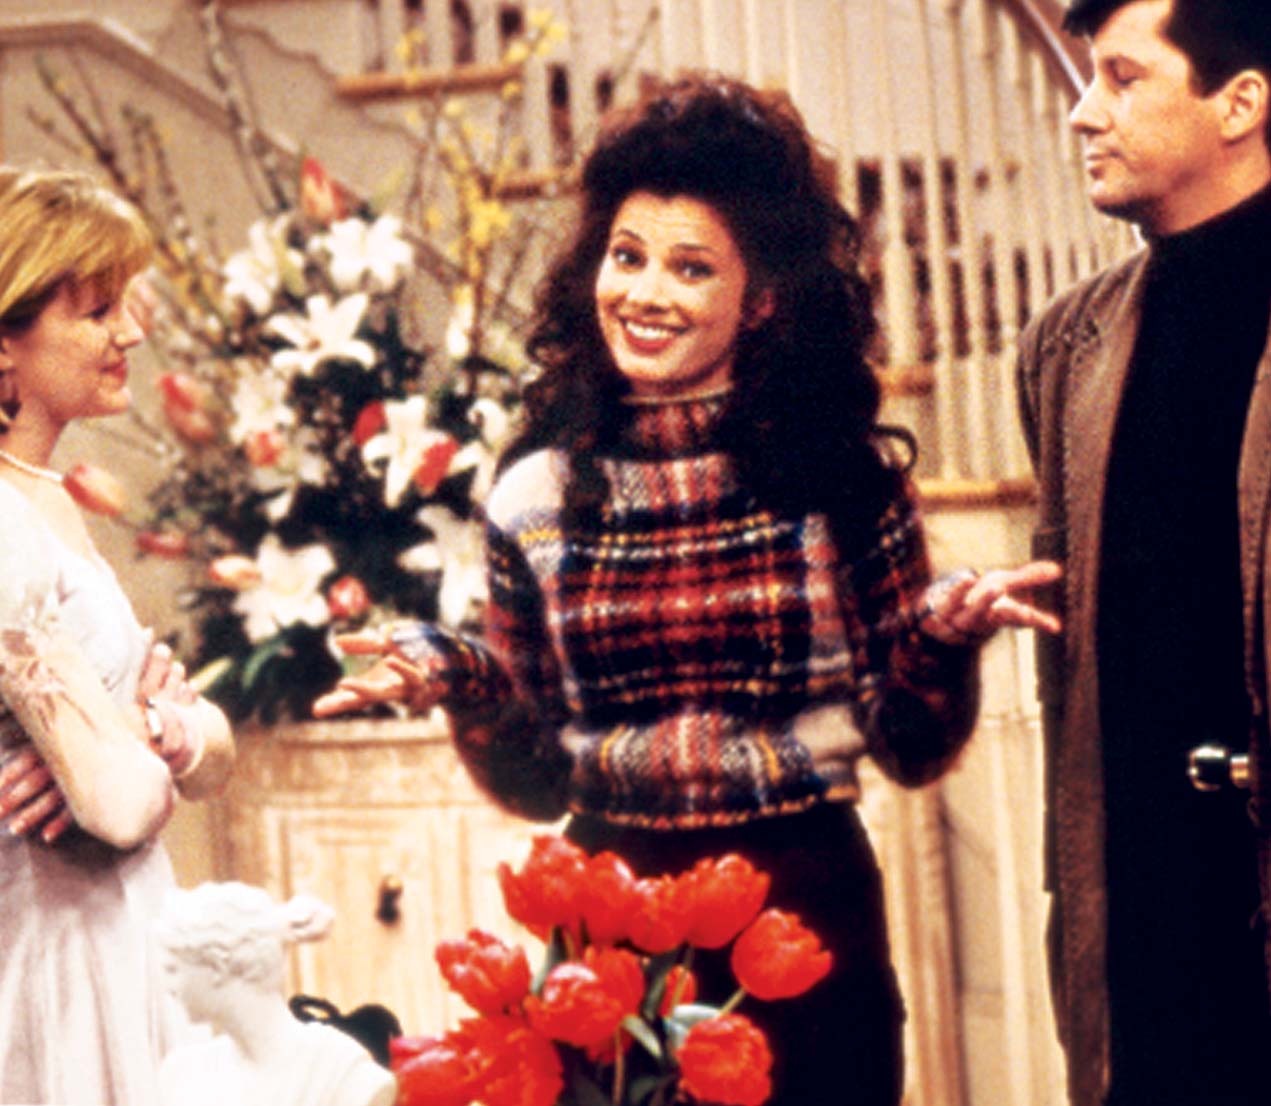 Still of Fran Drescher, Nicholle Tom and Charles Shaughnessy in The Nanny (1993)